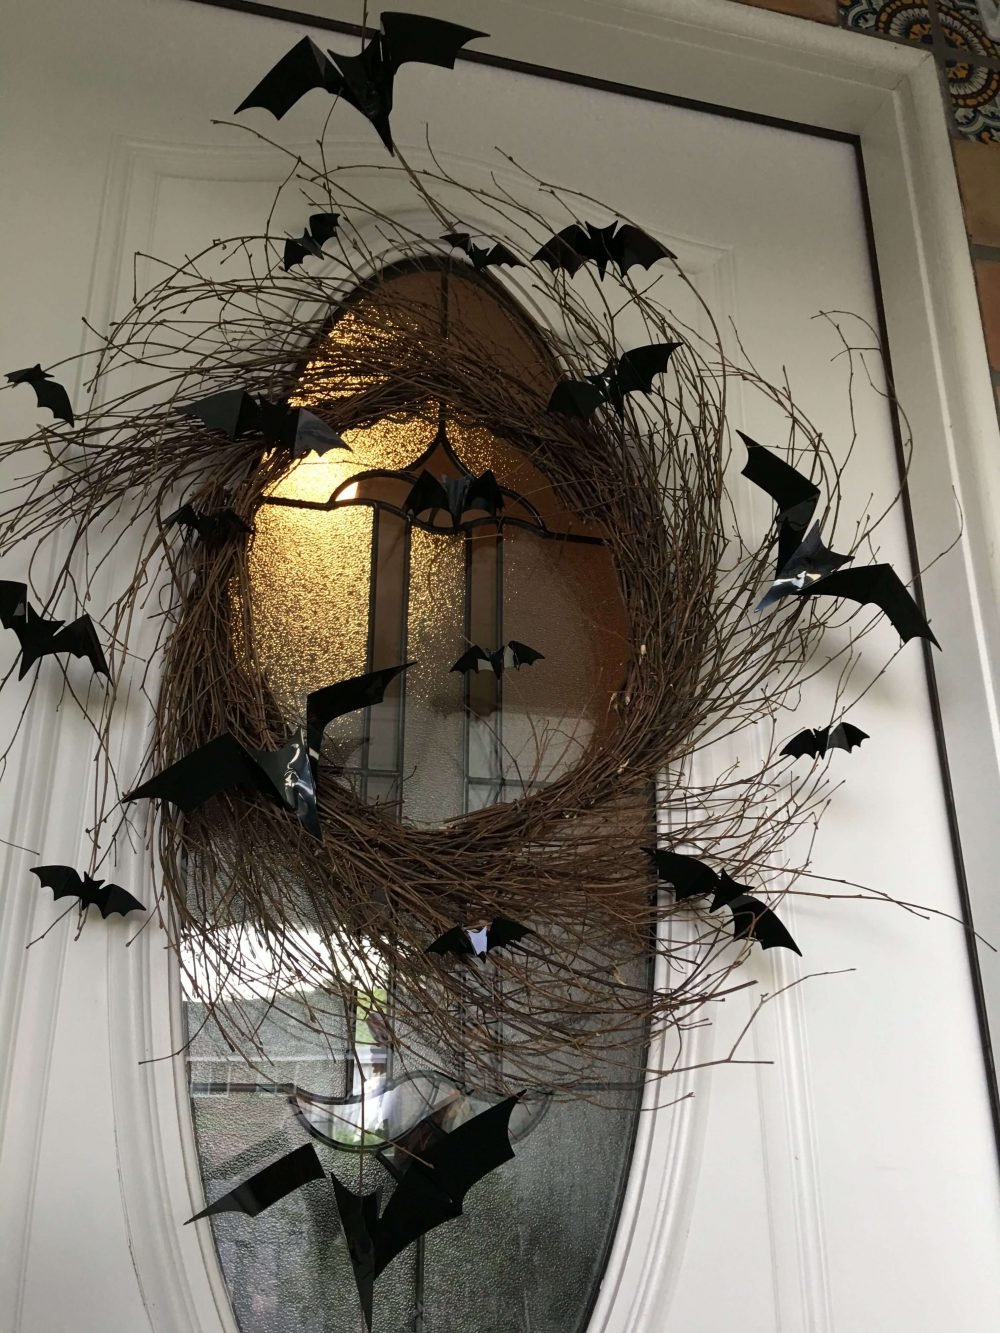 A wreath with bats hanging from it
